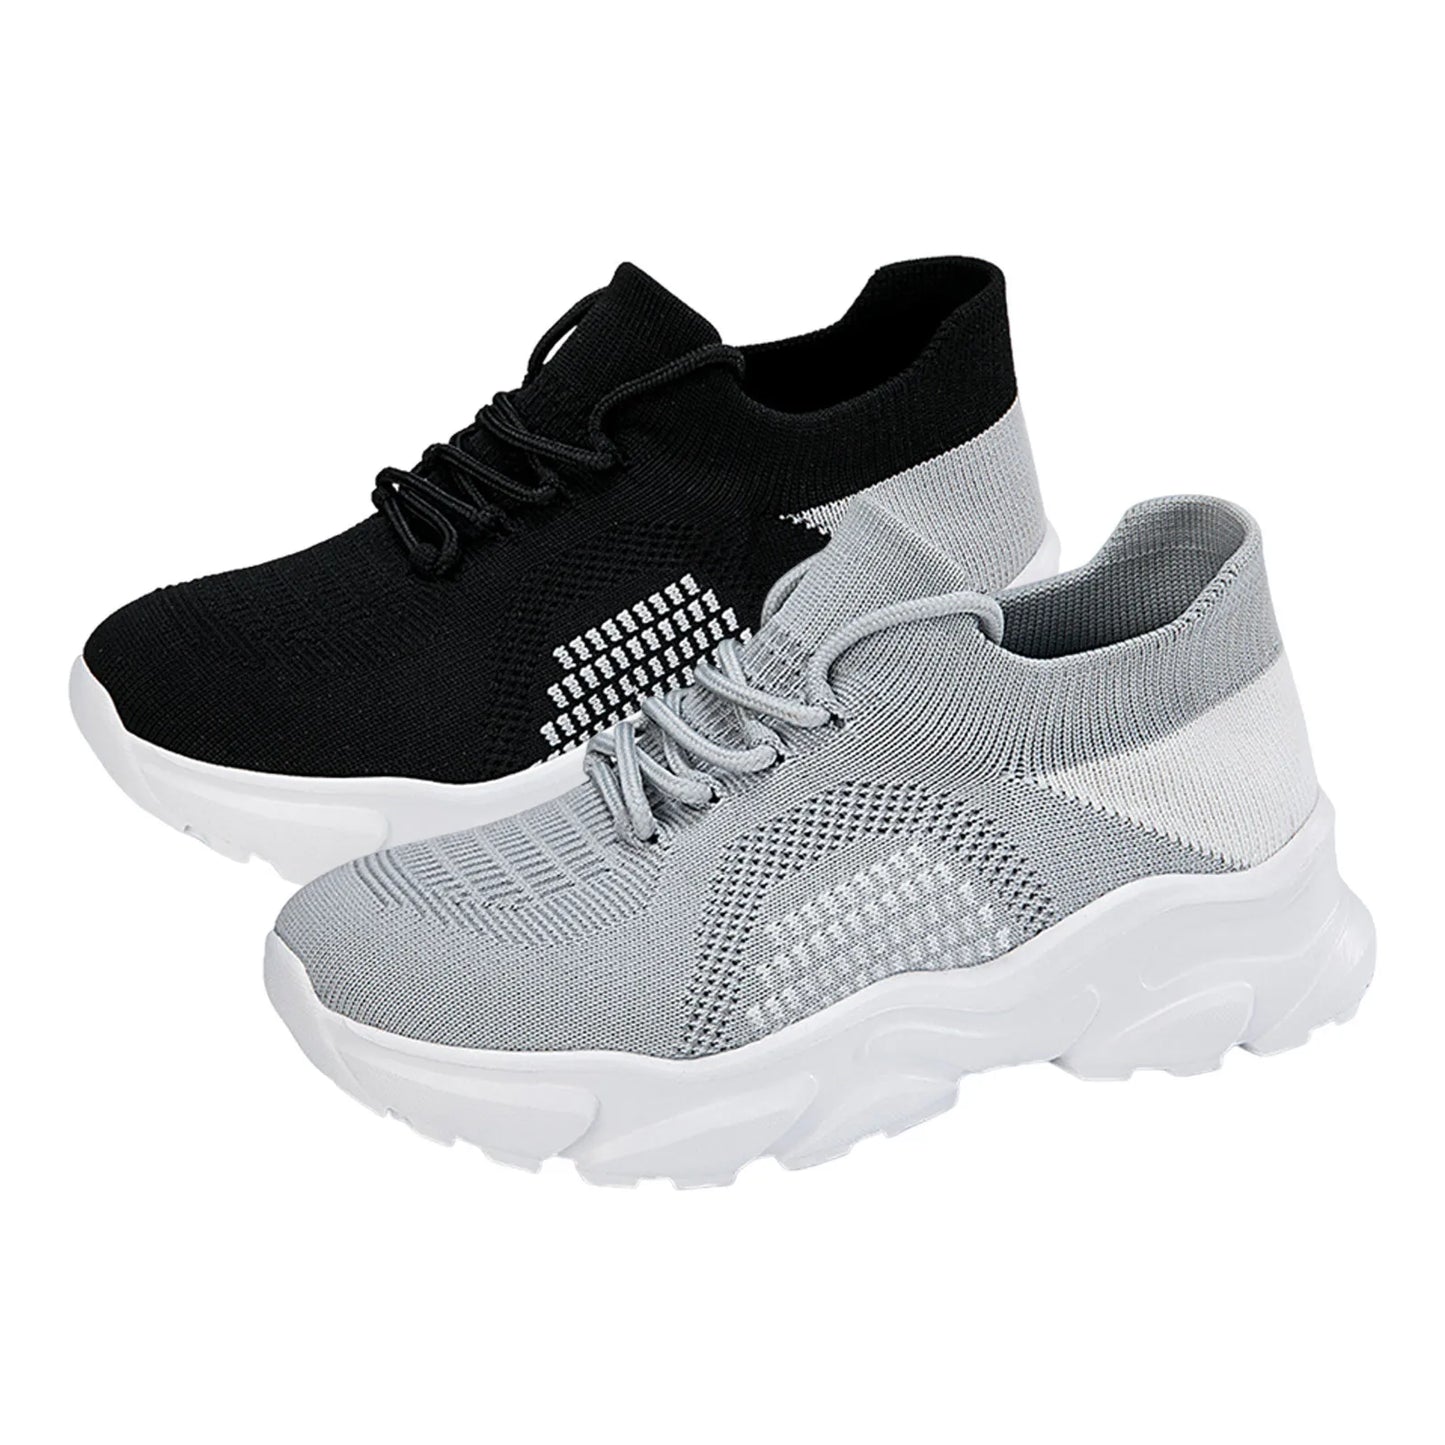 Men Flying Weave Sneakers Breathable Mesh Shoes/Casual Sports Thick Bottom Large Size Knitting Sock Walking Shoes